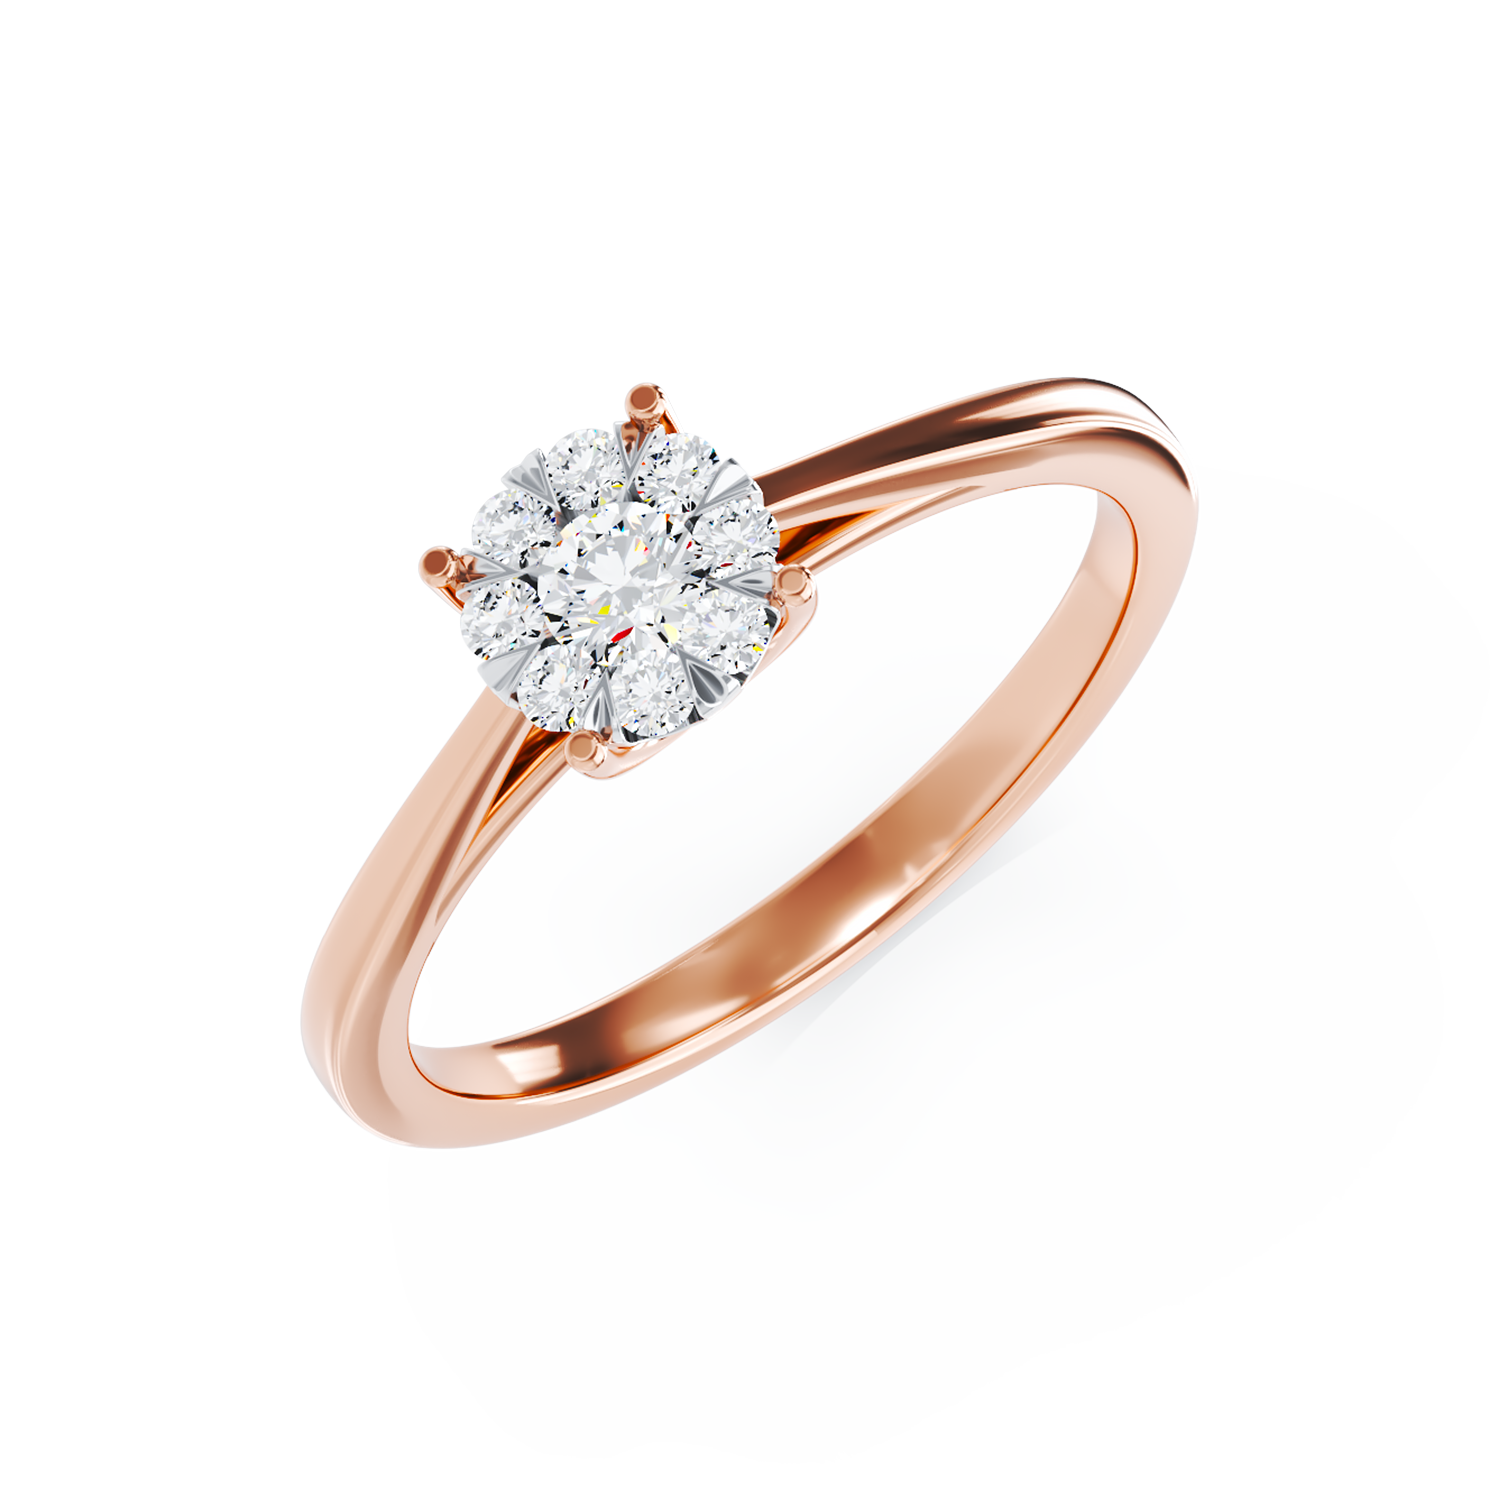 18K rose gold engagement ring with 0.15ct diamonds